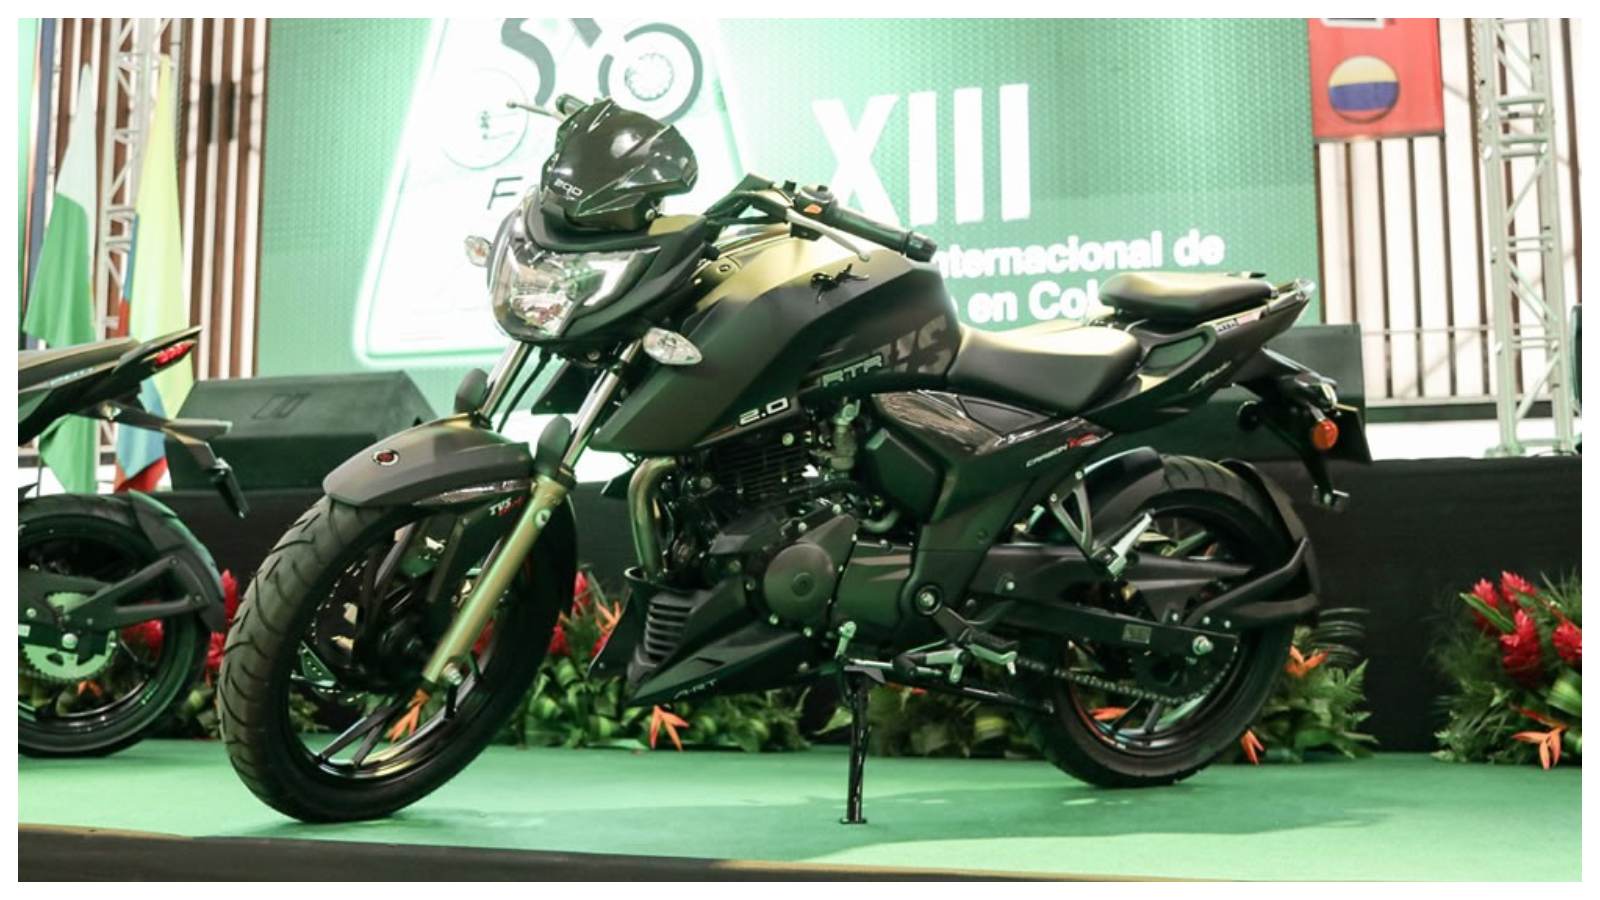 Carbon Editions Of Tvs Apache Rtr 160 4v And Rtr 200 4v Unveiled